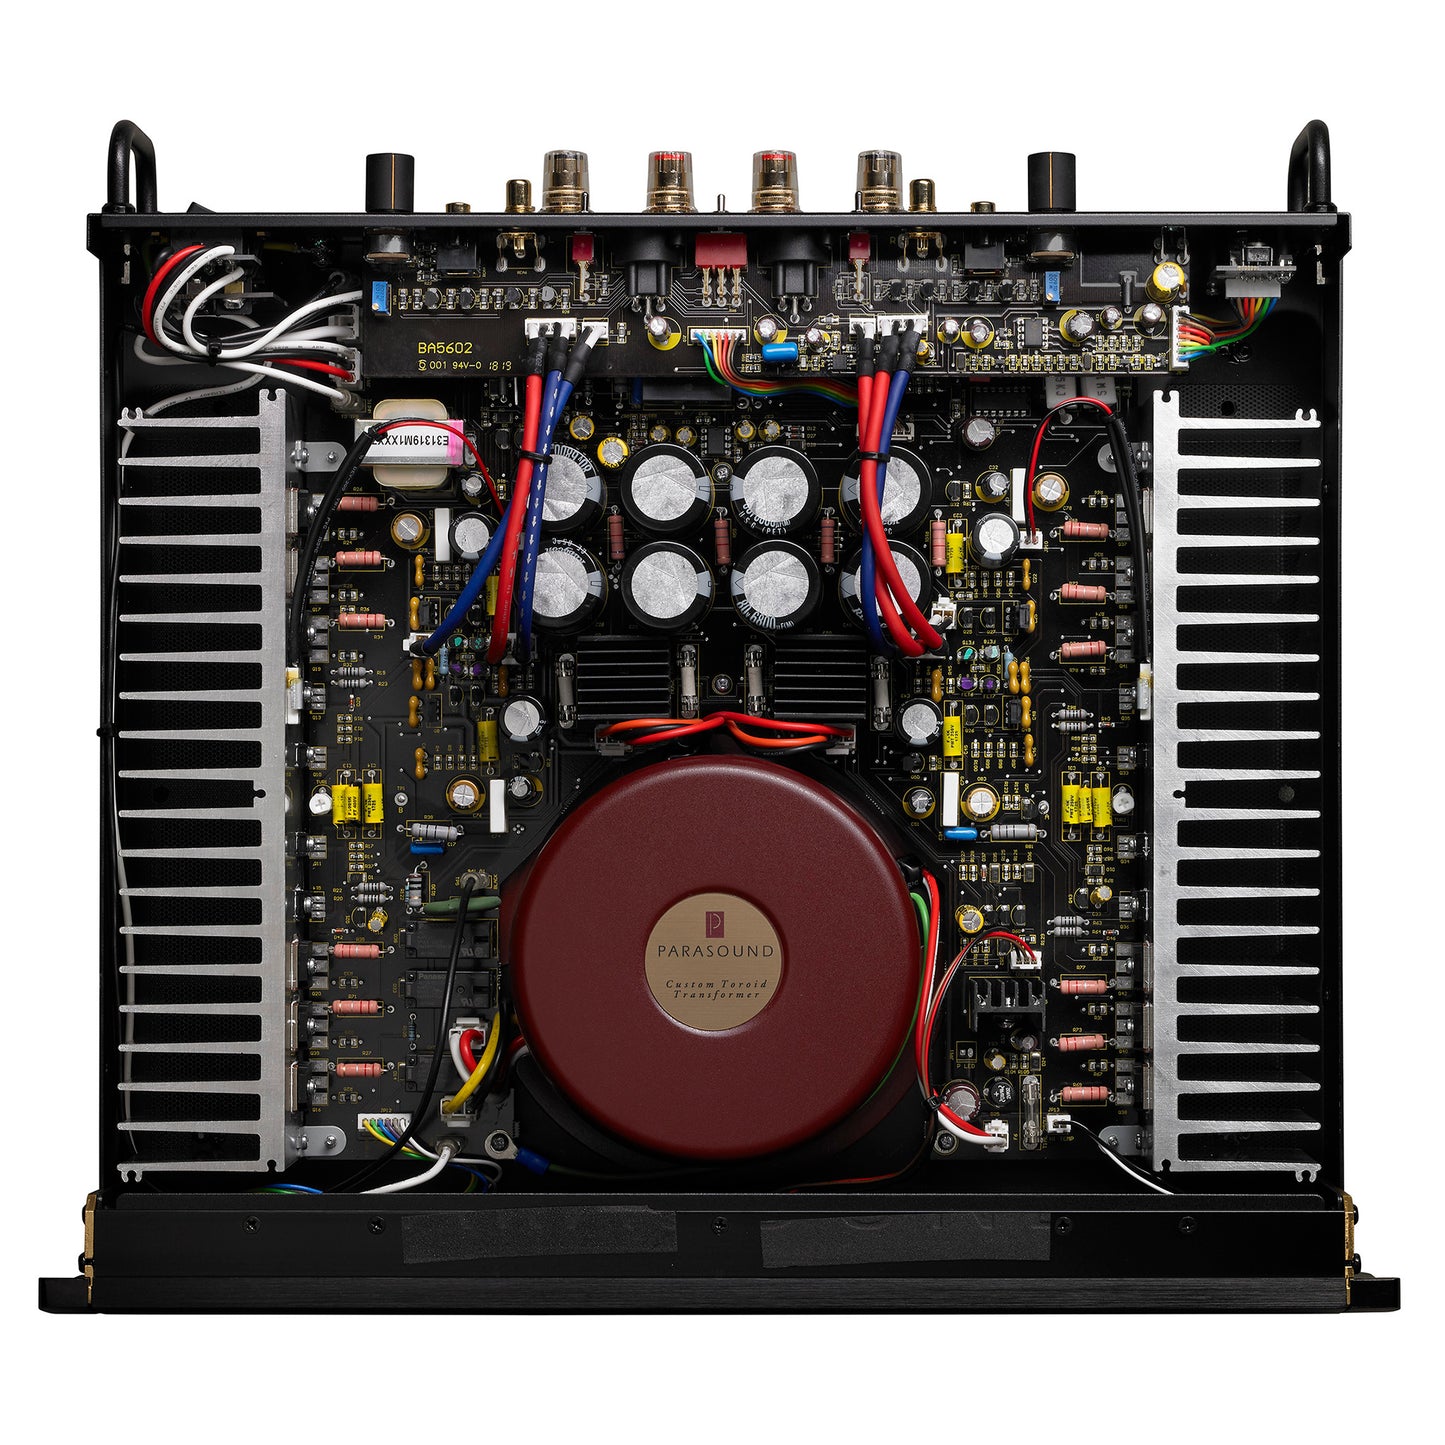 Parasound Halo A 23+ Stereo Power Amplifier